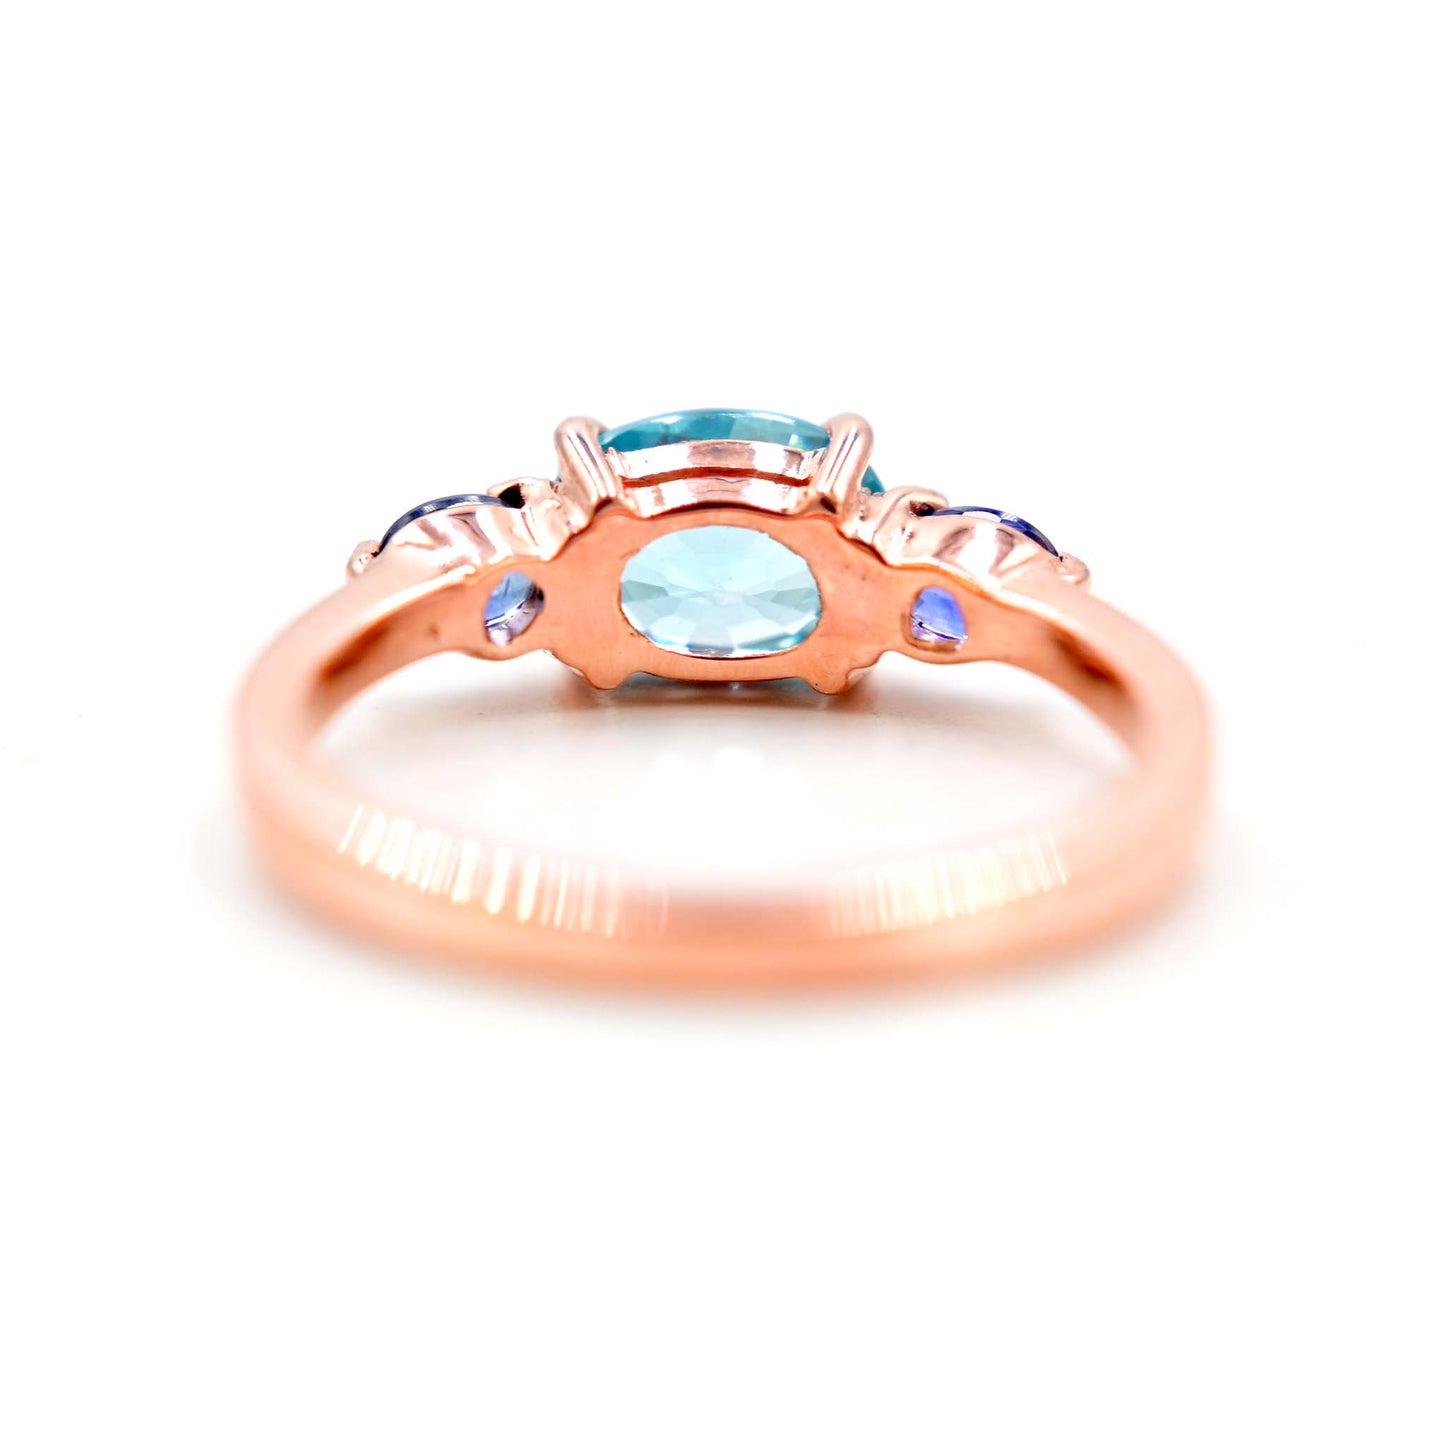 Back view of the Skylite Rose 14k ring. Handmade in Chiang Mai, Thailand